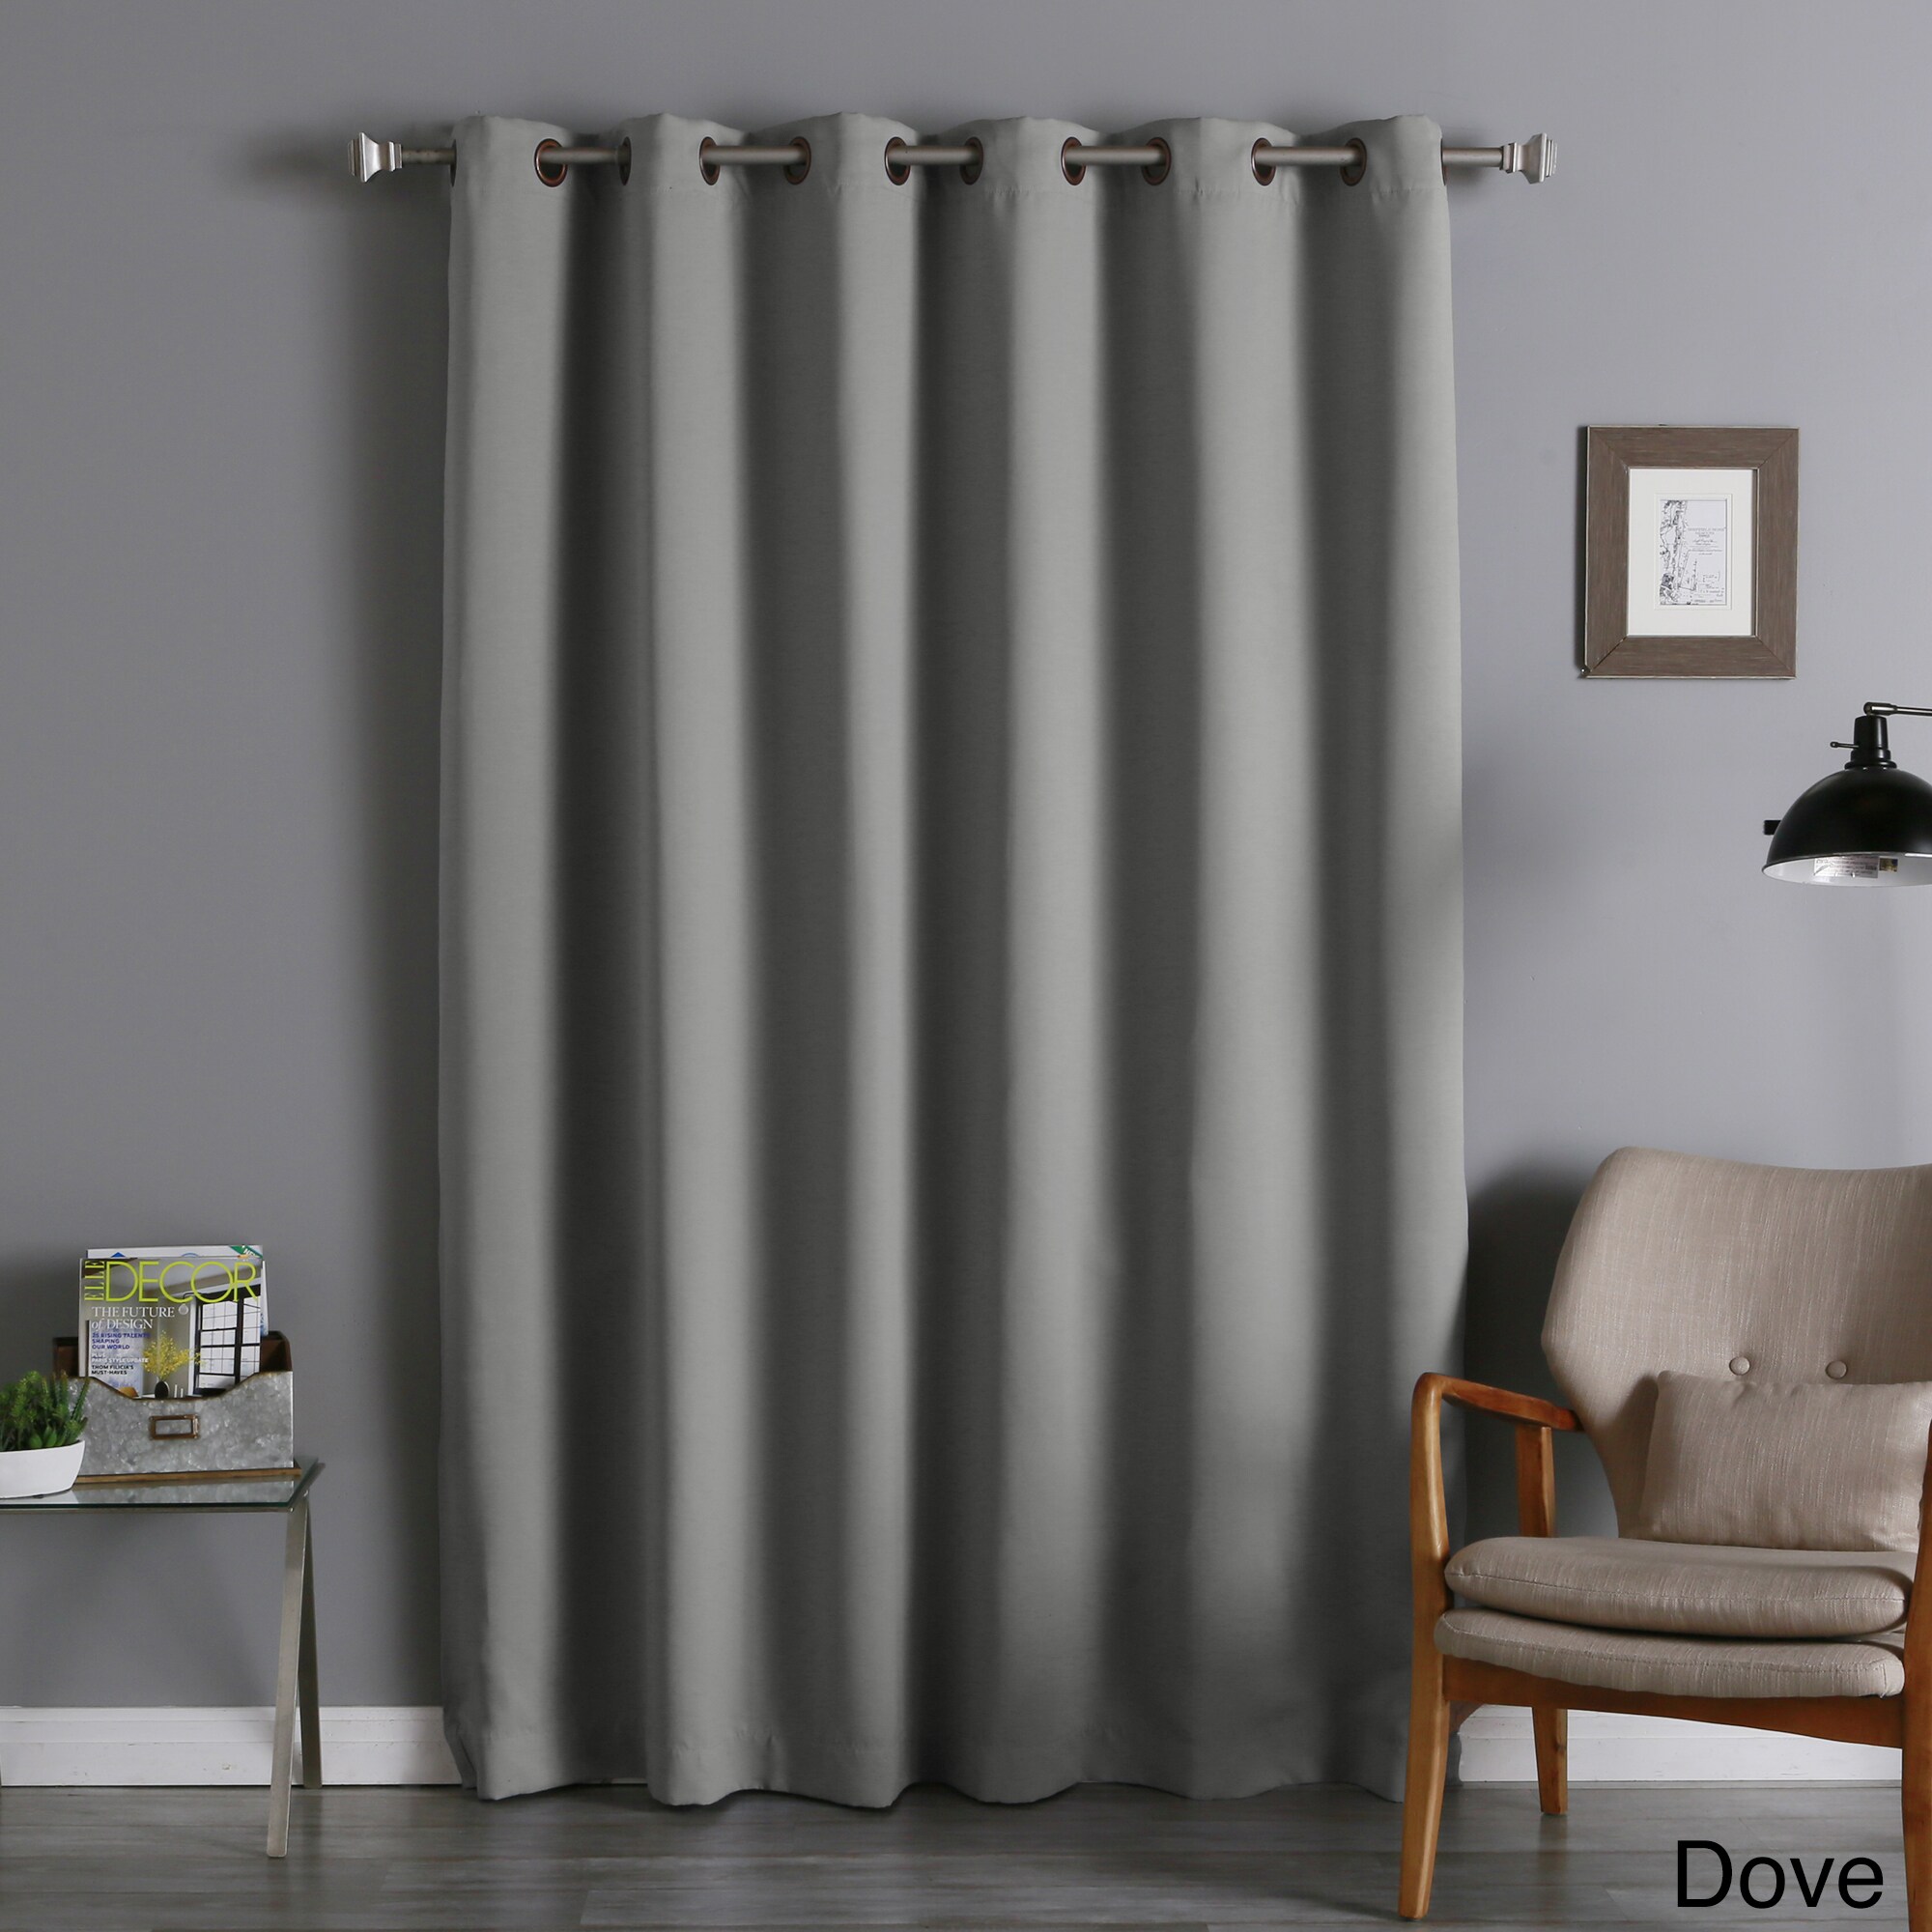 2 Panels, 52 by 84-Inch, Platinum & Greyish White NICETOWN Nursery Star Window Curtain Panels Room Darkening Blackout Drapes with Eyelets for Girls Room